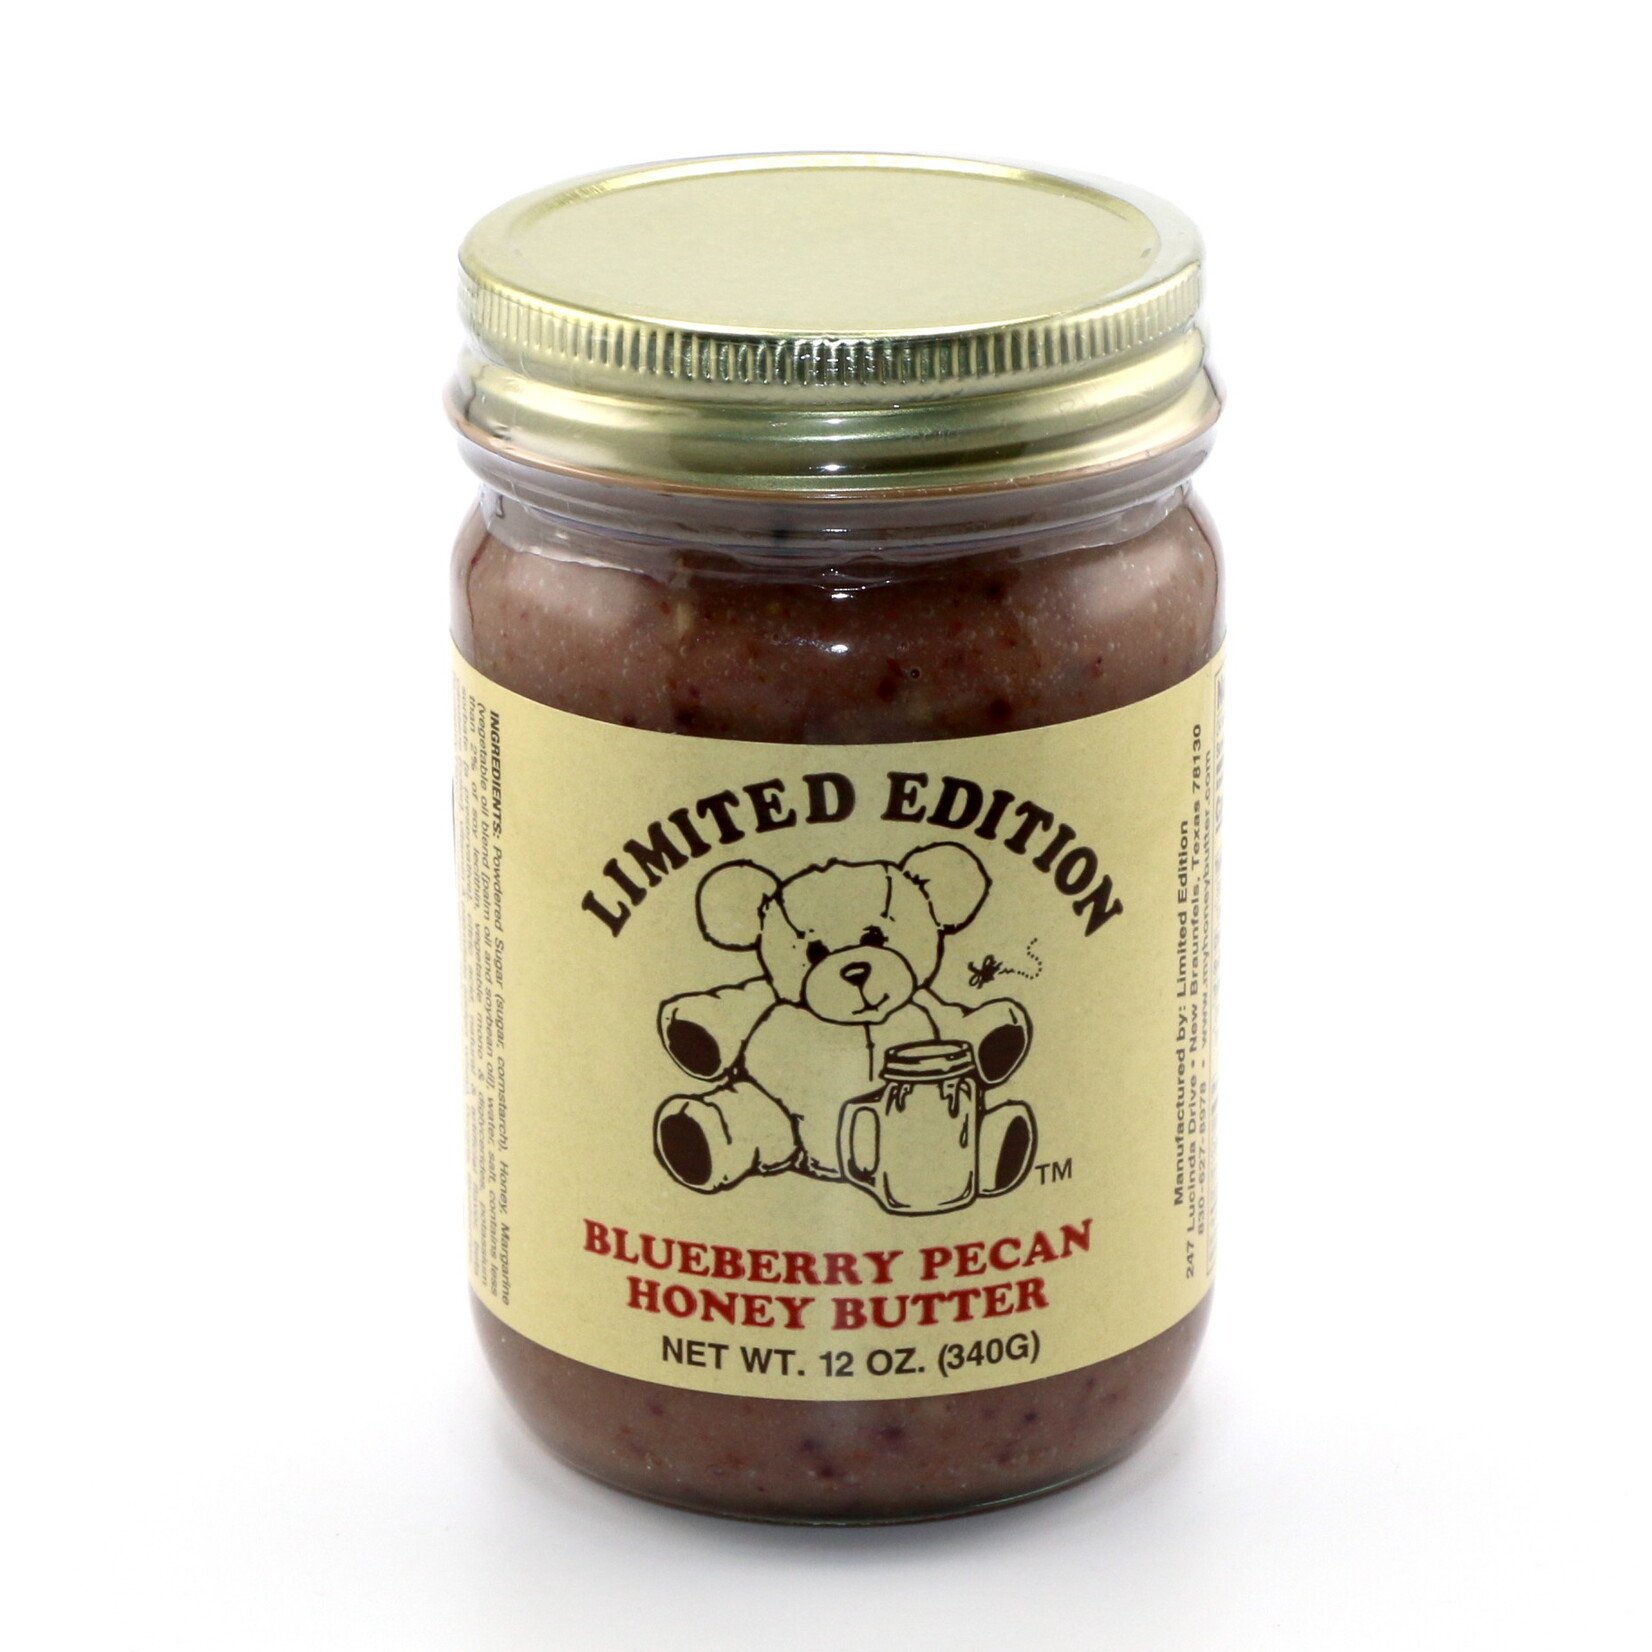 LIMITED EDITION PRESENTS Limited Edition Blueberry Pecan Honey Butter - 12 oz